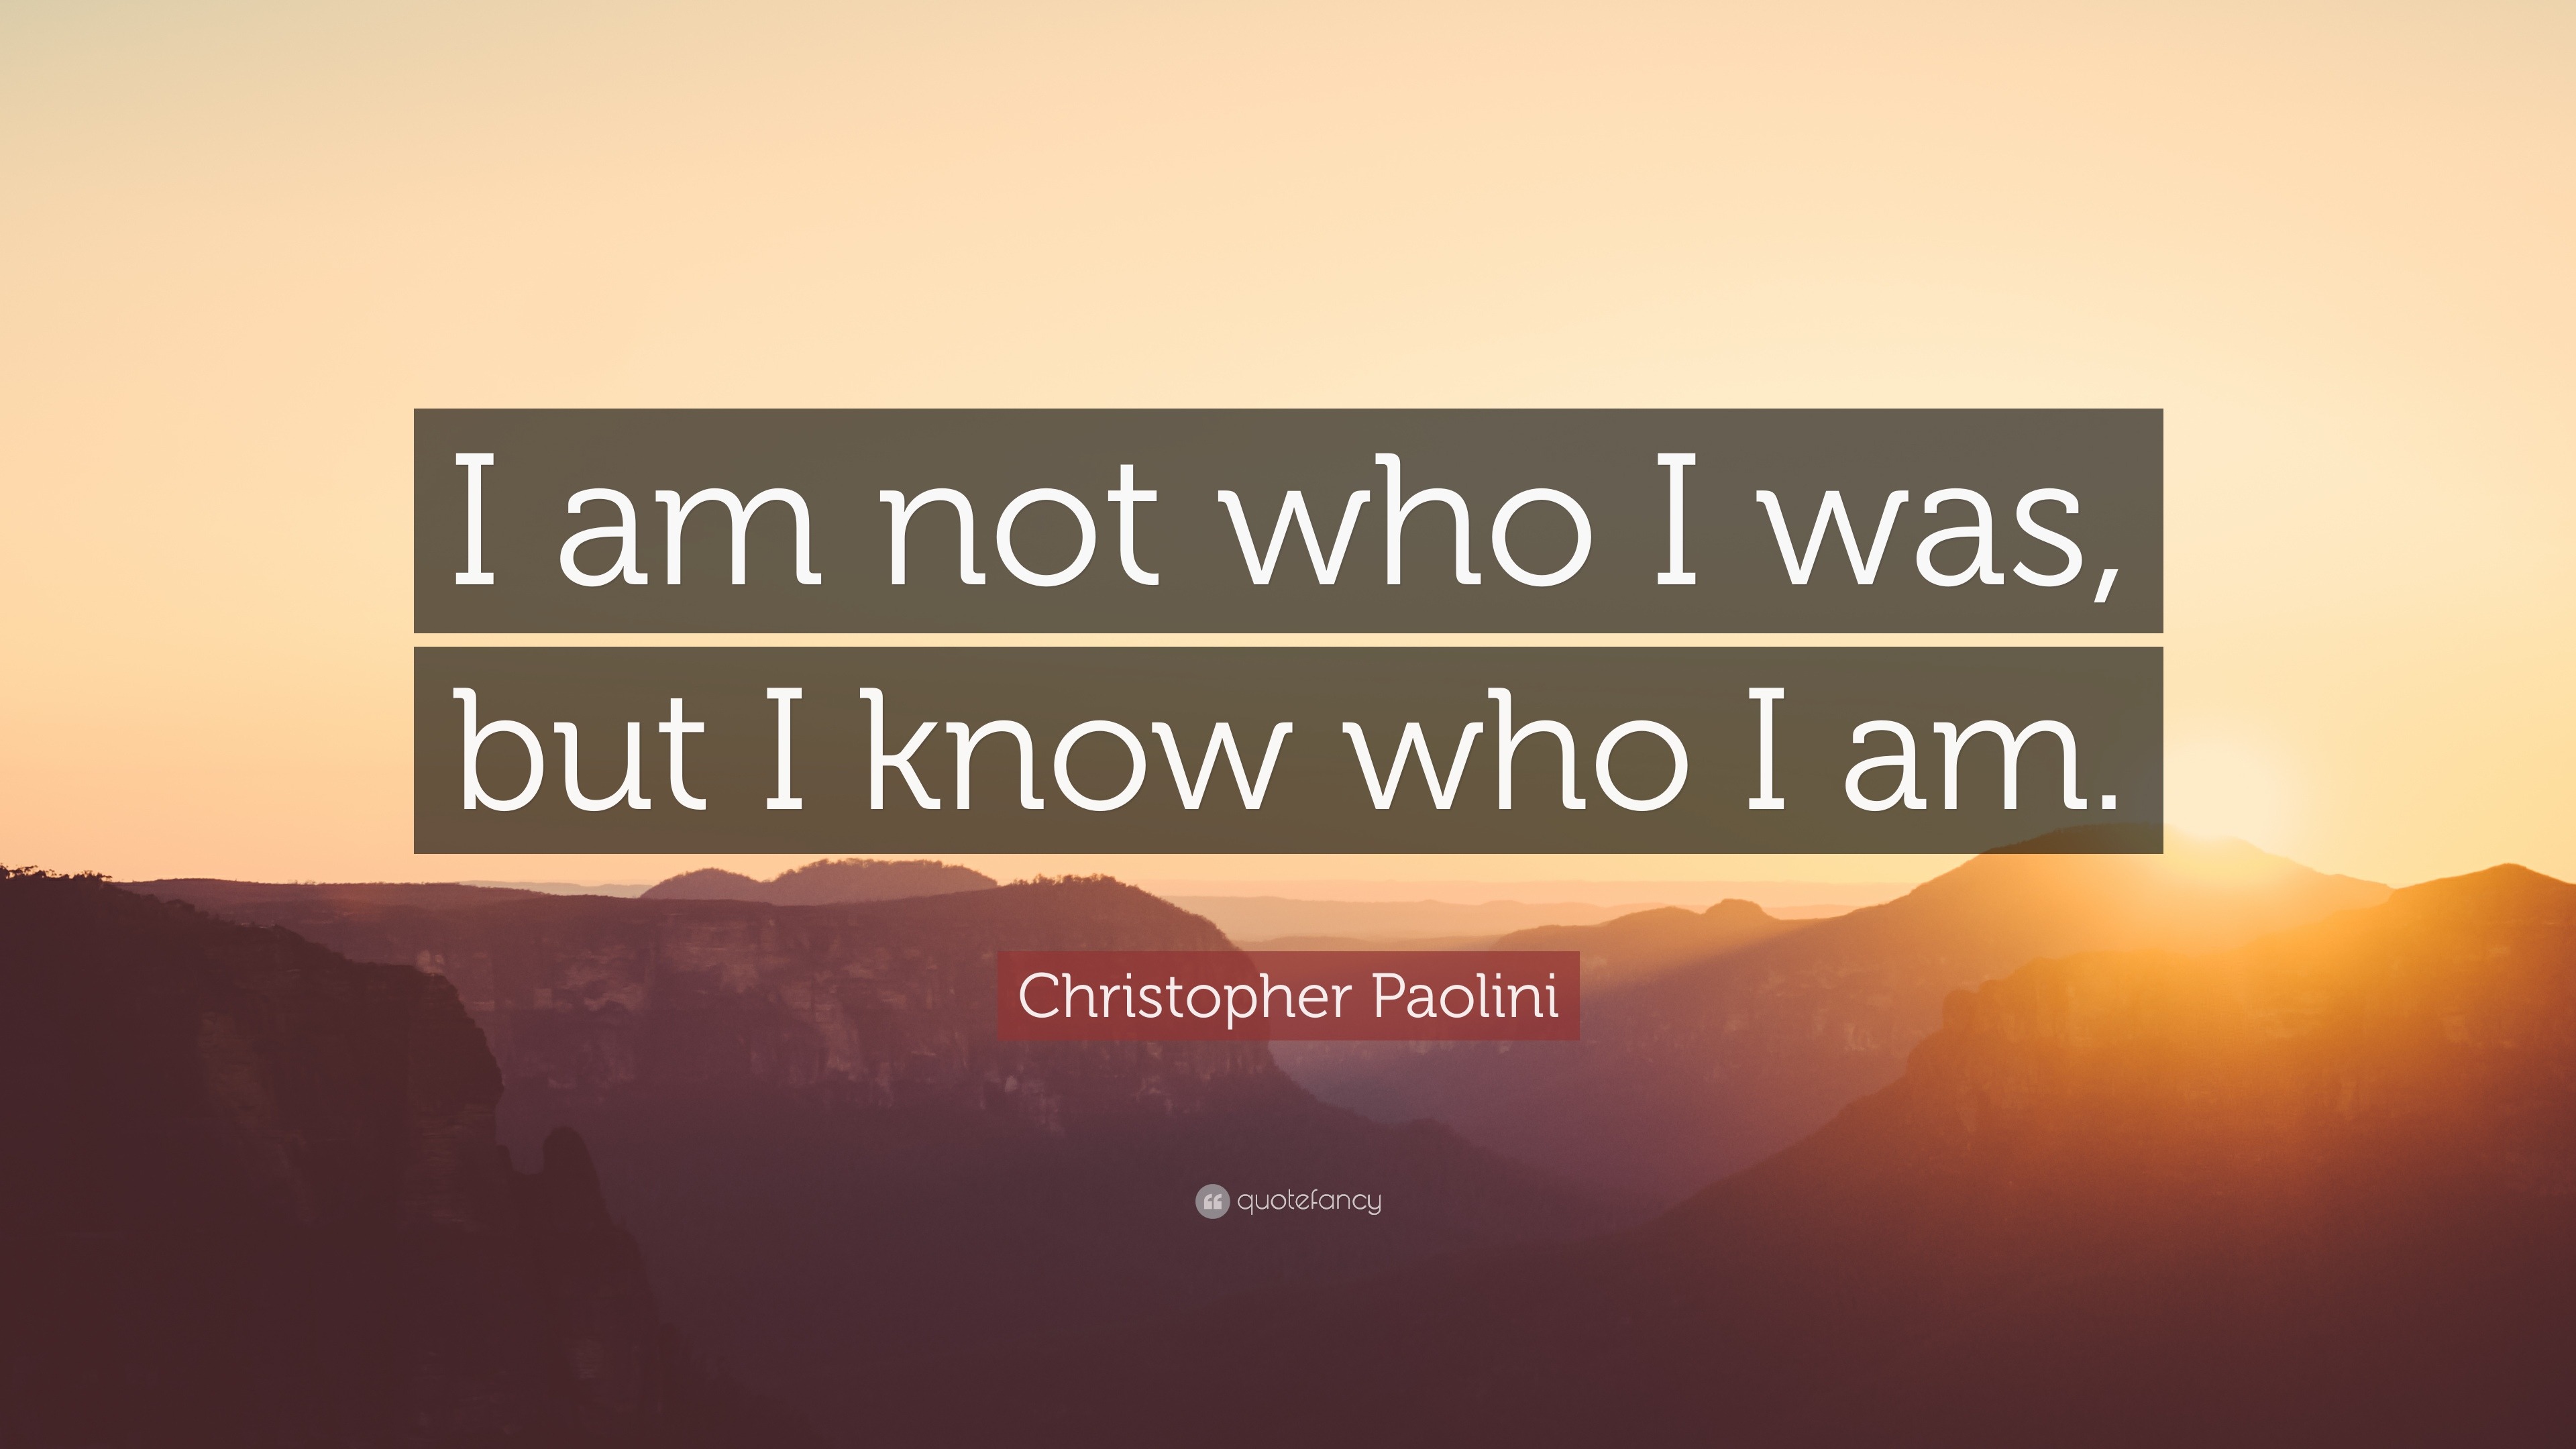 Christopher Paolini Quote: “I am not who I was, but I know who I am.”